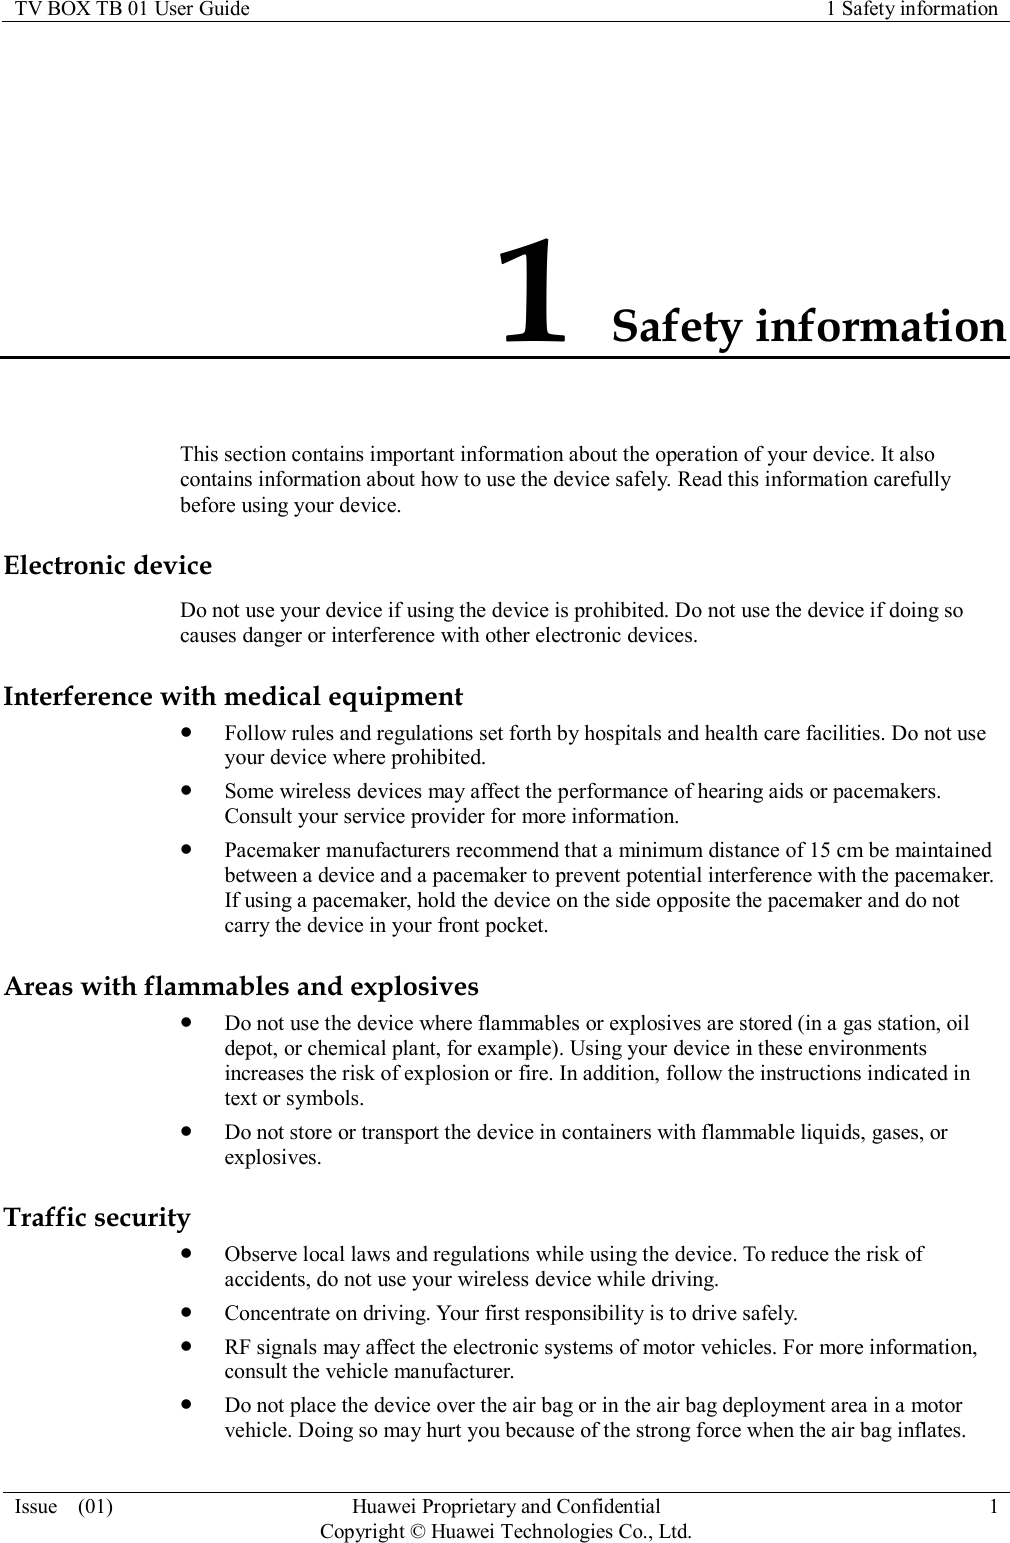 TV BOX TB 01 User Guide 1 Safety information  Issue    (01) Huawei Proprietary and Confidential                                     Copyright © Huawei Technologies Co., Ltd. 1  1 Safety information This section contains important information about the operation of your device. It also contains information about how to use the device safely. Read this information carefully before using your device. Electronic device Do not use your device if using the device is prohibited. Do not use the device if doing so causes danger or interference with other electronic devices. Interference with medical equipment  Follow rules and regulations set forth by hospitals and health care facilities. Do not use your device where prohibited.  Some wireless devices may affect the performance of hearing aids or pacemakers. Consult your service provider for more information.  Pacemaker manufacturers recommend that a minimum distance of 15 cm be maintained between a device and a pacemaker to prevent potential interference with the pacemaker. If using a pacemaker, hold the device on the side opposite the pacemaker and do not carry the device in your front pocket. Areas with flammables and explosives  Do not use the device where flammables or explosives are stored (in a gas station, oil depot, or chemical plant, for example). Using your device in these environments increases the risk of explosion or fire. In addition, follow the instructions indicated in text or symbols.  Do not store or transport the device in containers with flammable liquids, gases, or explosives. Traffic security  Observe local laws and regulations while using the device. To reduce the risk of accidents, do not use your wireless device while driving.  Concentrate on driving. Your first responsibility is to drive safely.  RF signals may affect the electronic systems of motor vehicles. For more information, consult the vehicle manufacturer.  Do not place the device over the air bag or in the air bag deployment area in a motor vehicle. Doing so may hurt you because of the strong force when the air bag inflates. 